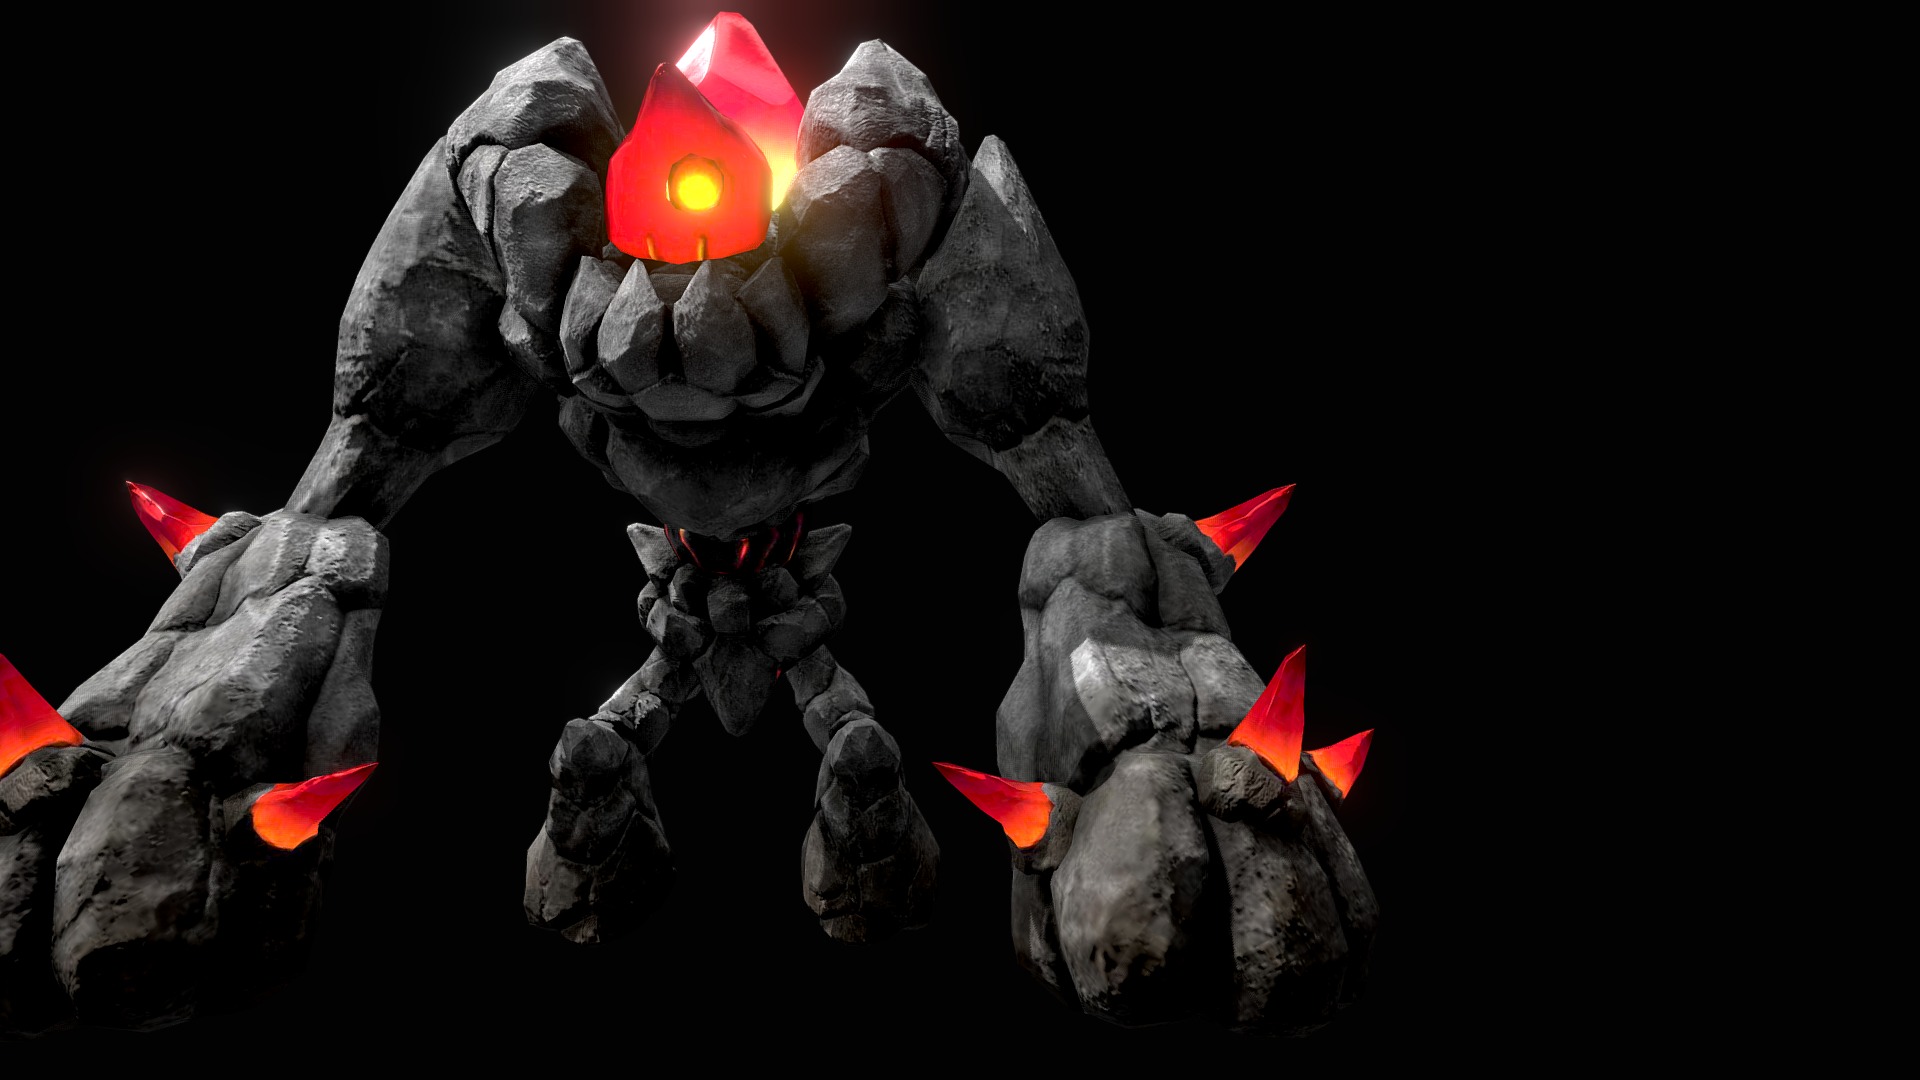 Stone Golem Set - Super Siege 

Slow moving Super Stone Golem with magical attack ability. Suitable to be used with Unity 3D or Unreal Engine 4.


Included animations:

* Idle 1

* Idle 2

* Idle 3

* Walk

* Attack

* Dead

Check the entire animations in action here : https://www.youtube.com/watch?v=OxPsrgVXrcM

You can buy the entire set from here
https://sketchfab.com/models/7704ecf6f15044aeb8d02b0898d829f6 - Super Golem - Siege - 3D model by willpowaproject 3d model